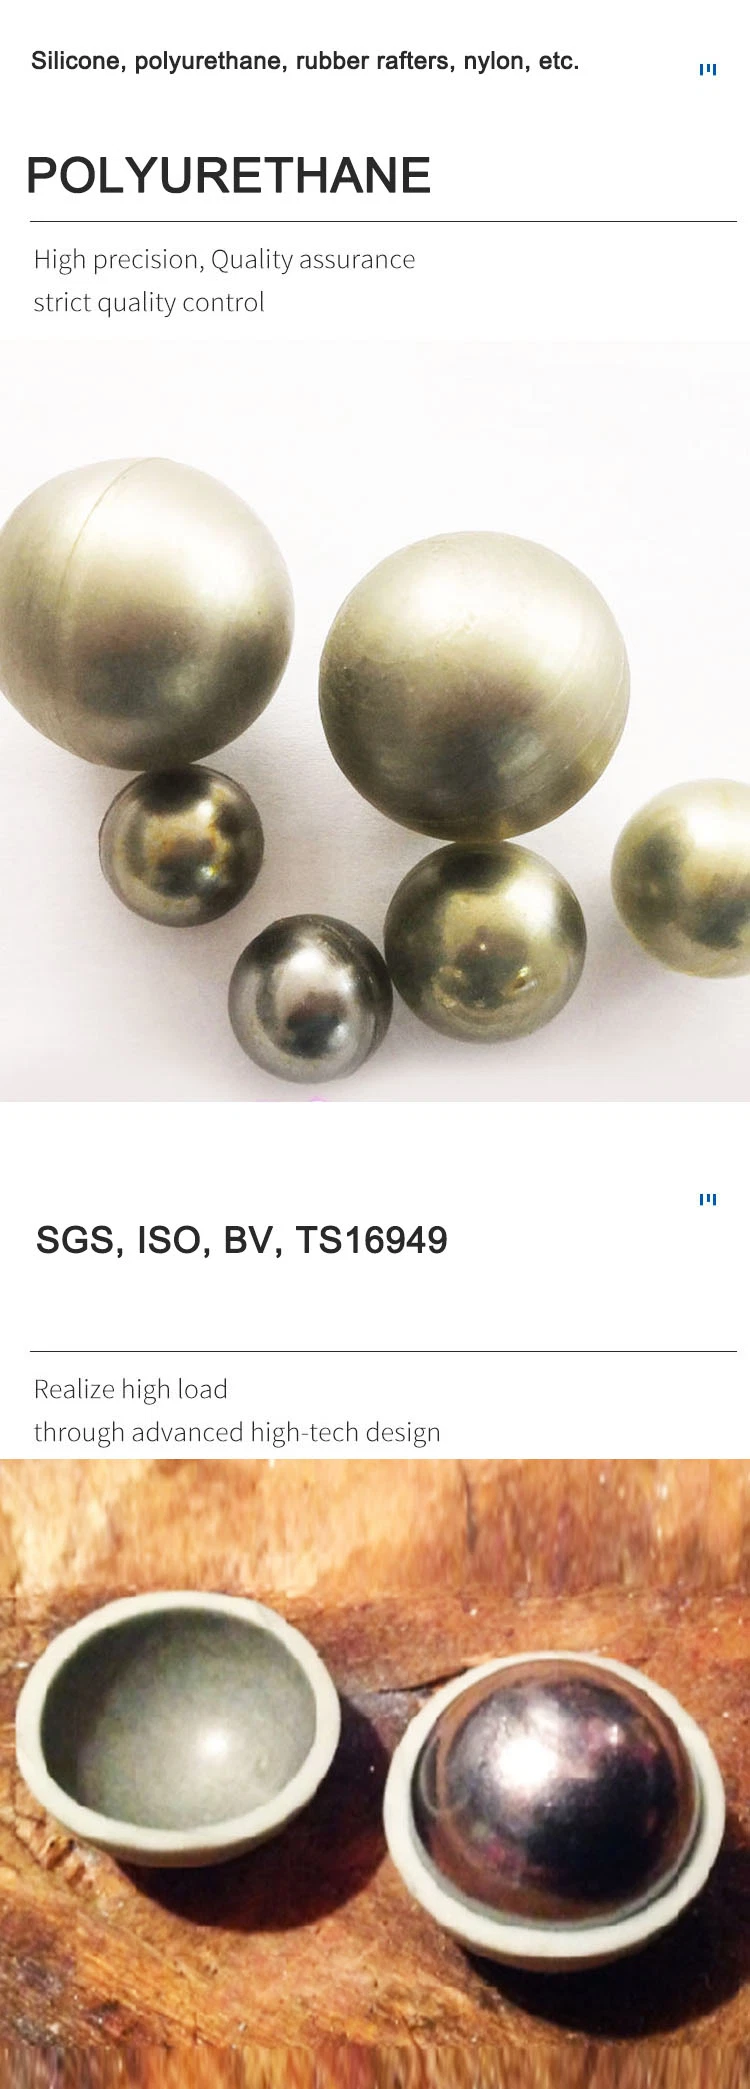 Good Quality and Price of Silicone Polyurethane Nylon Rubber Coated Balls